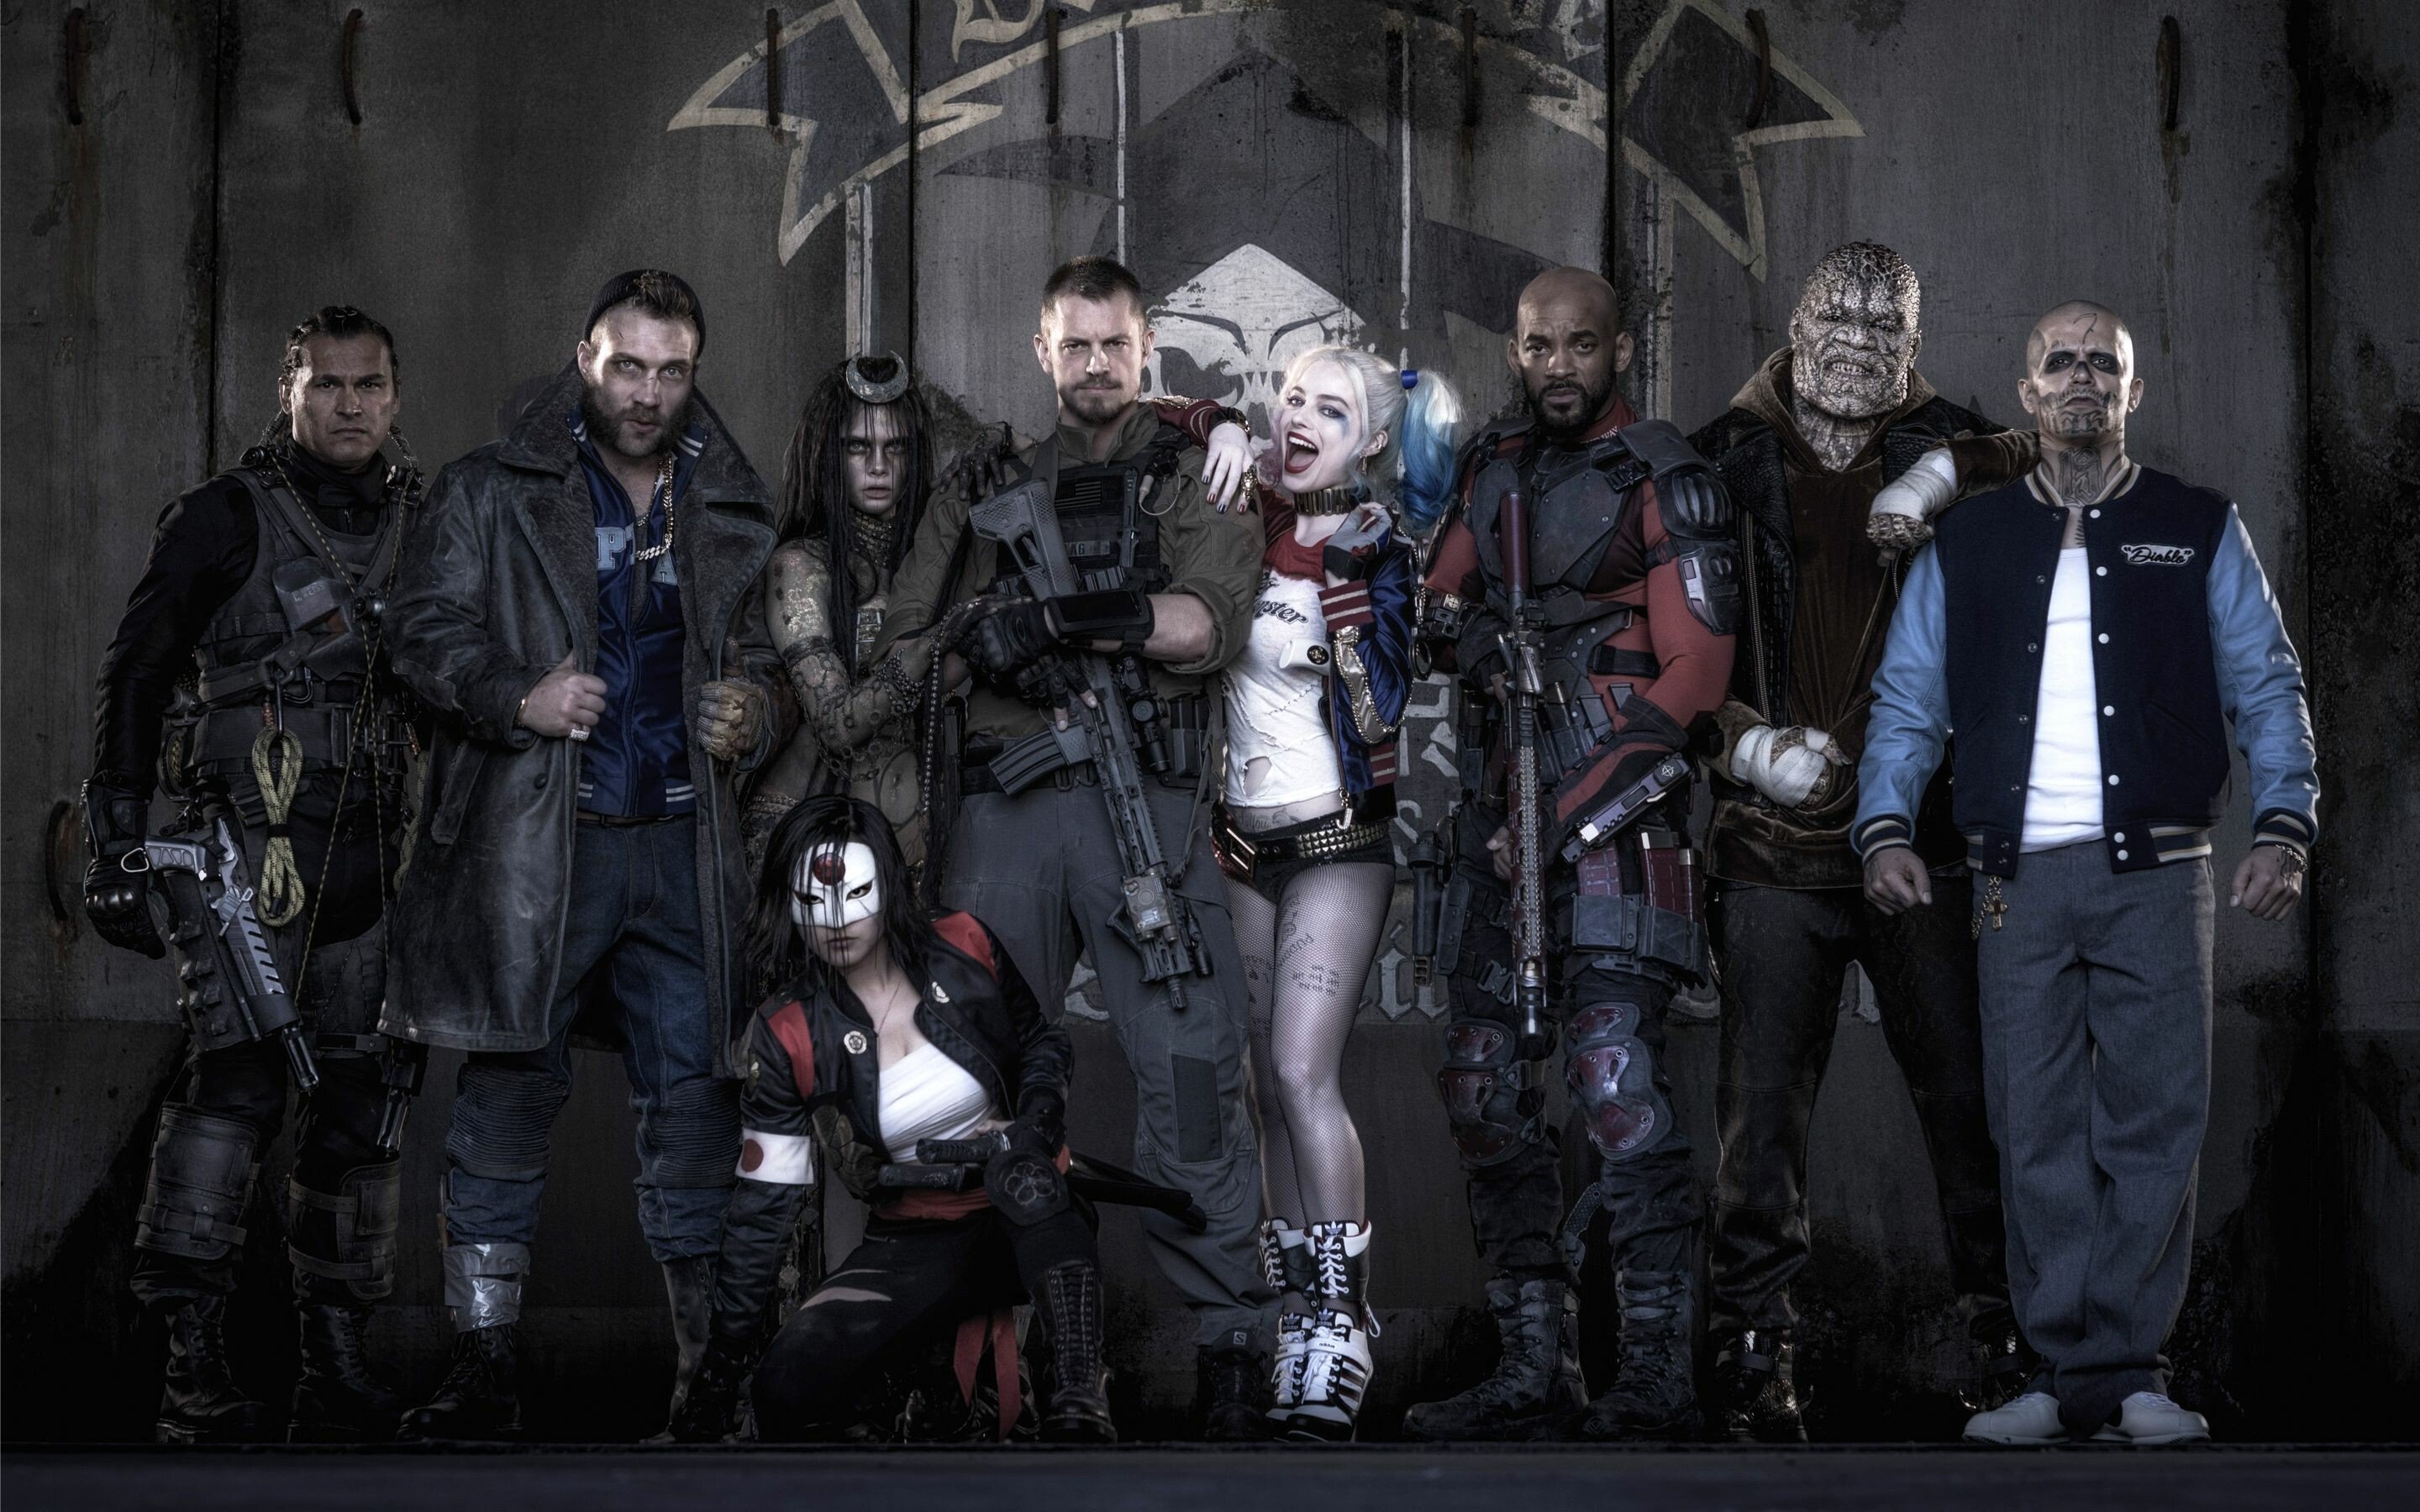 Suicide Squad Movie Wallpaper: HD, 4K, 5K for PC and Mobile. Download free image for iPhone, Android